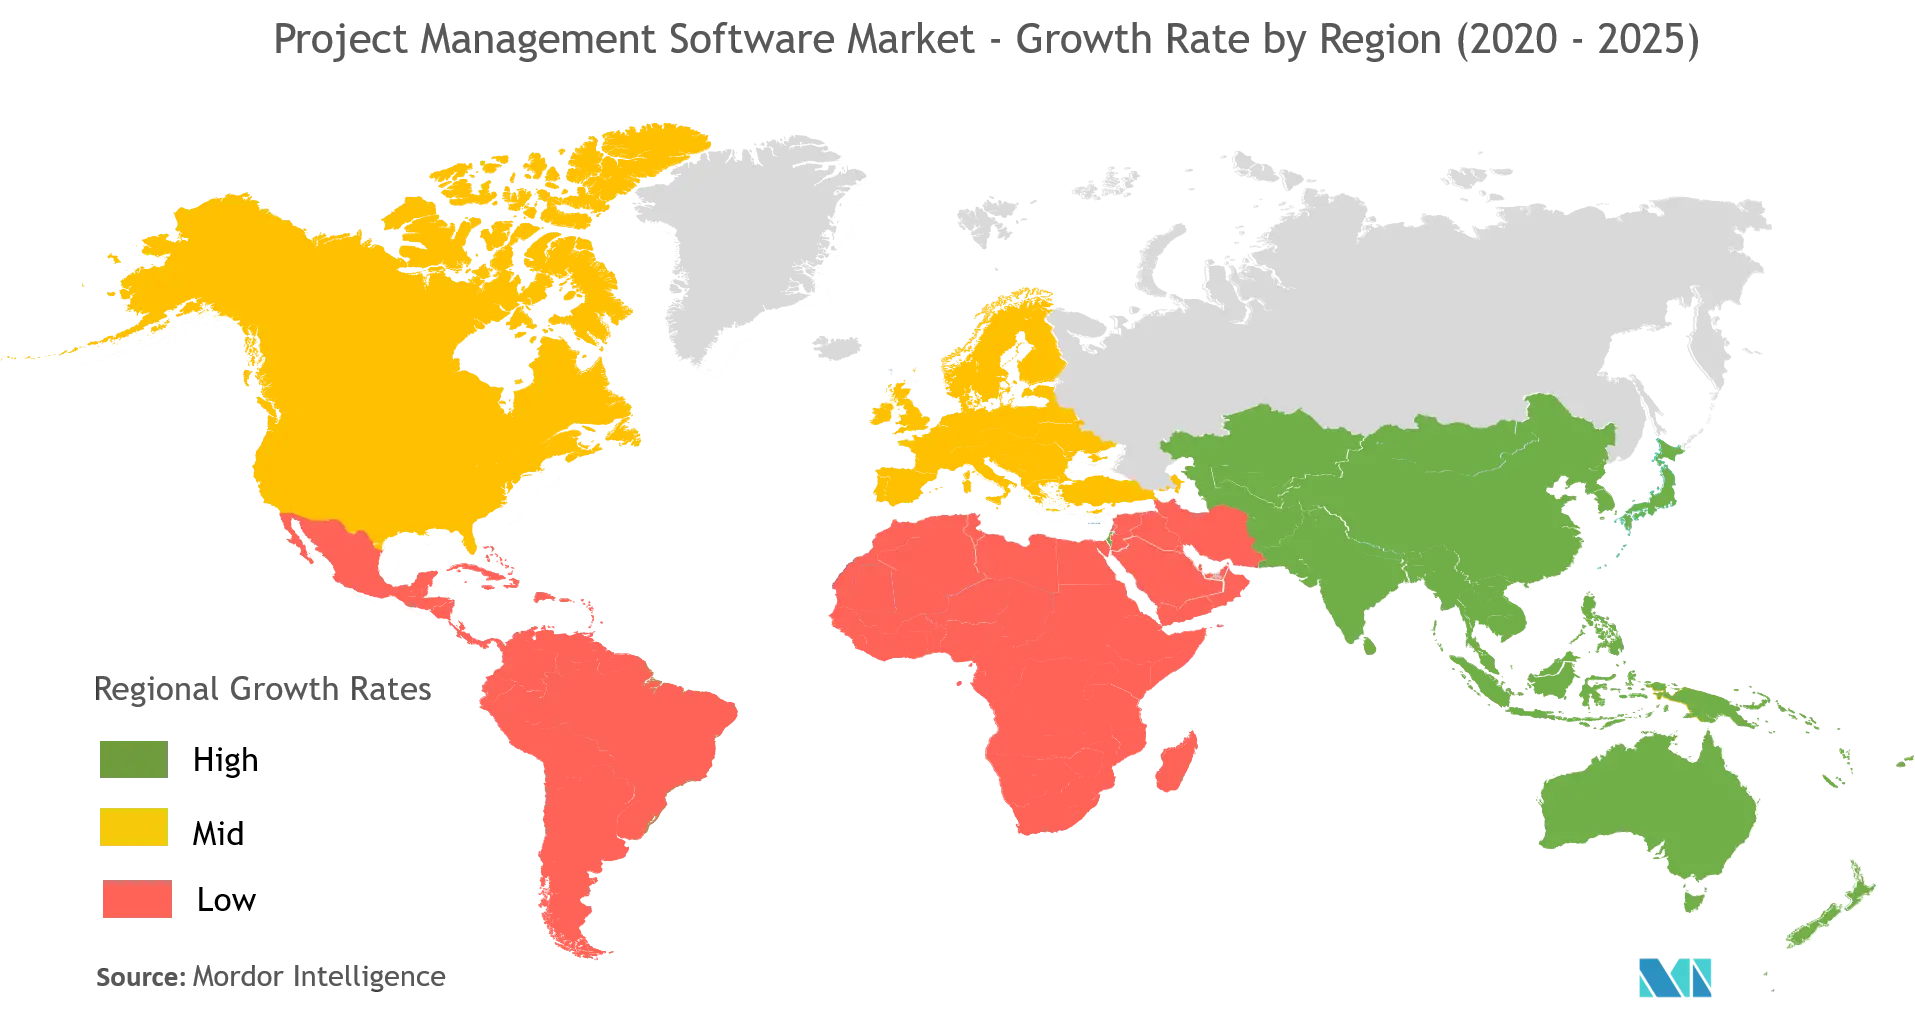 Project Management Software Systems Market Growth Rate